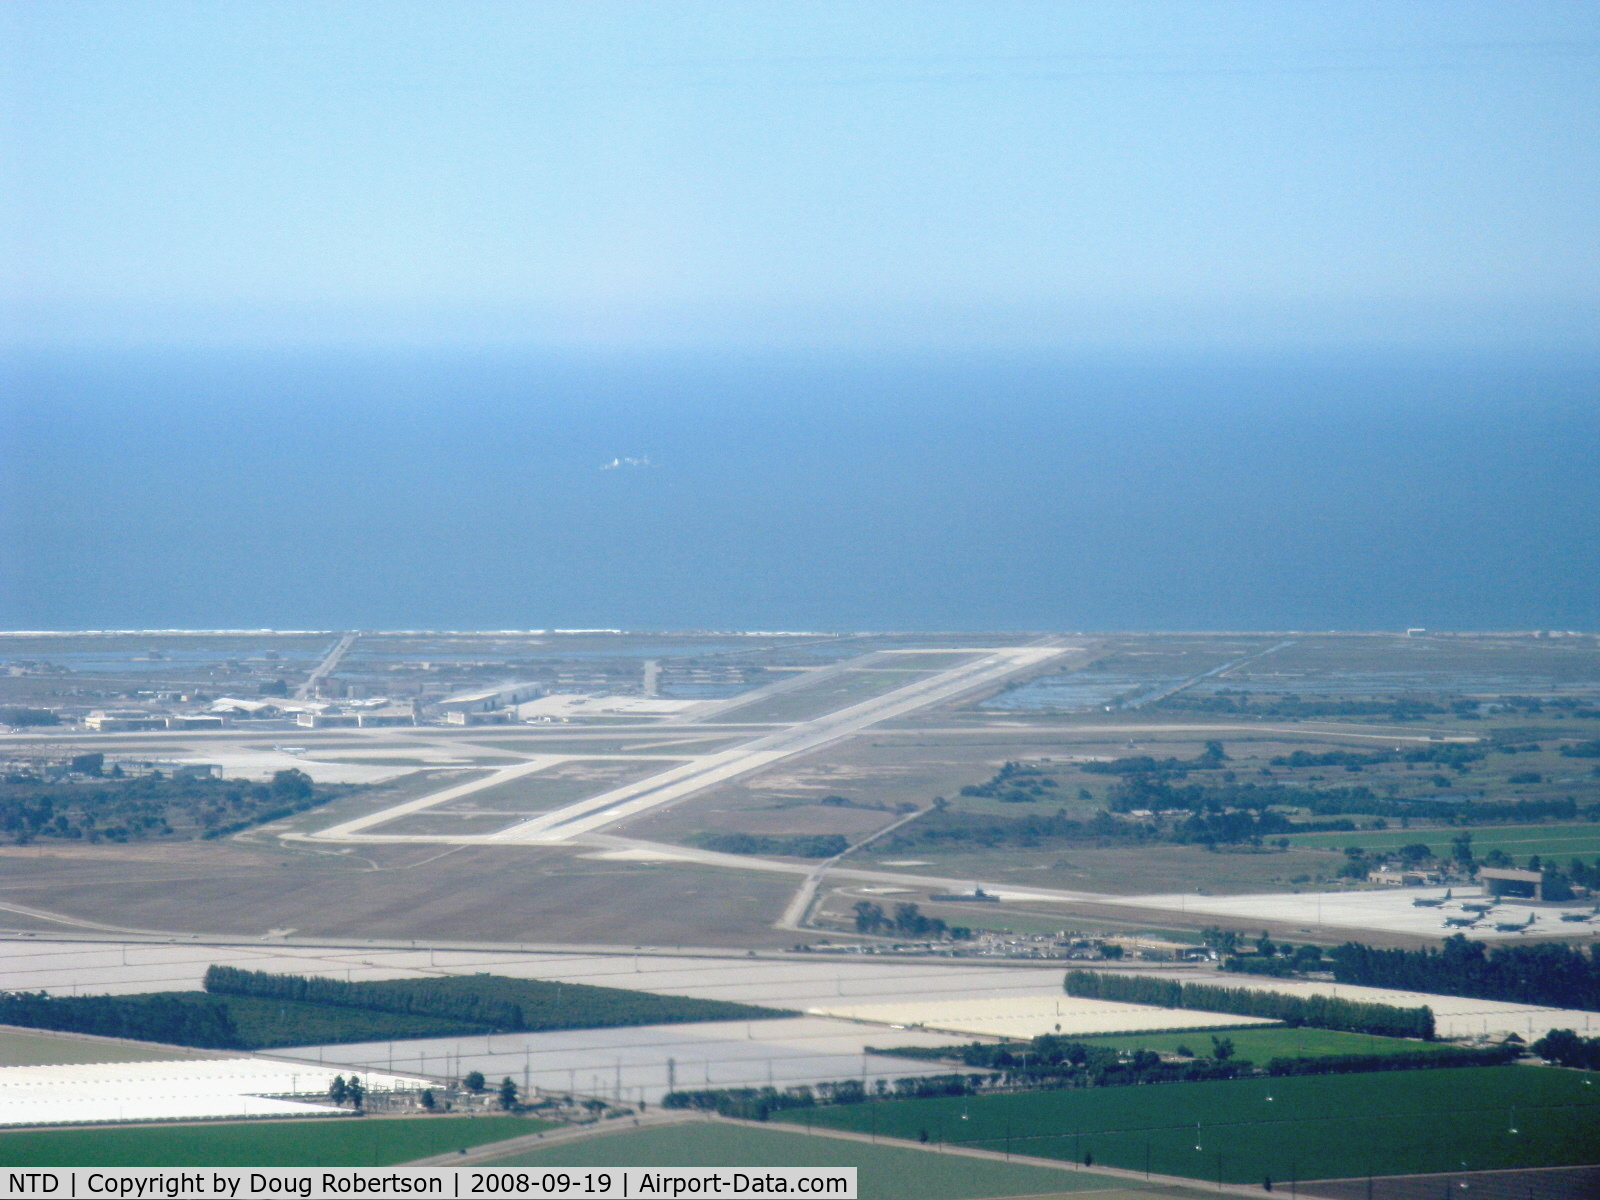 Point Mugu Nas (naval Base Ventura Co) Airport (NTD) - Naval Air Warfare Station, Point Mugu, California. Pacific Ocean beyond. Lower right portion shows Channel Islands Air National Guard taxiway and ramp who shares Point Mugu's two runways. Taken from RV-6, N406L.